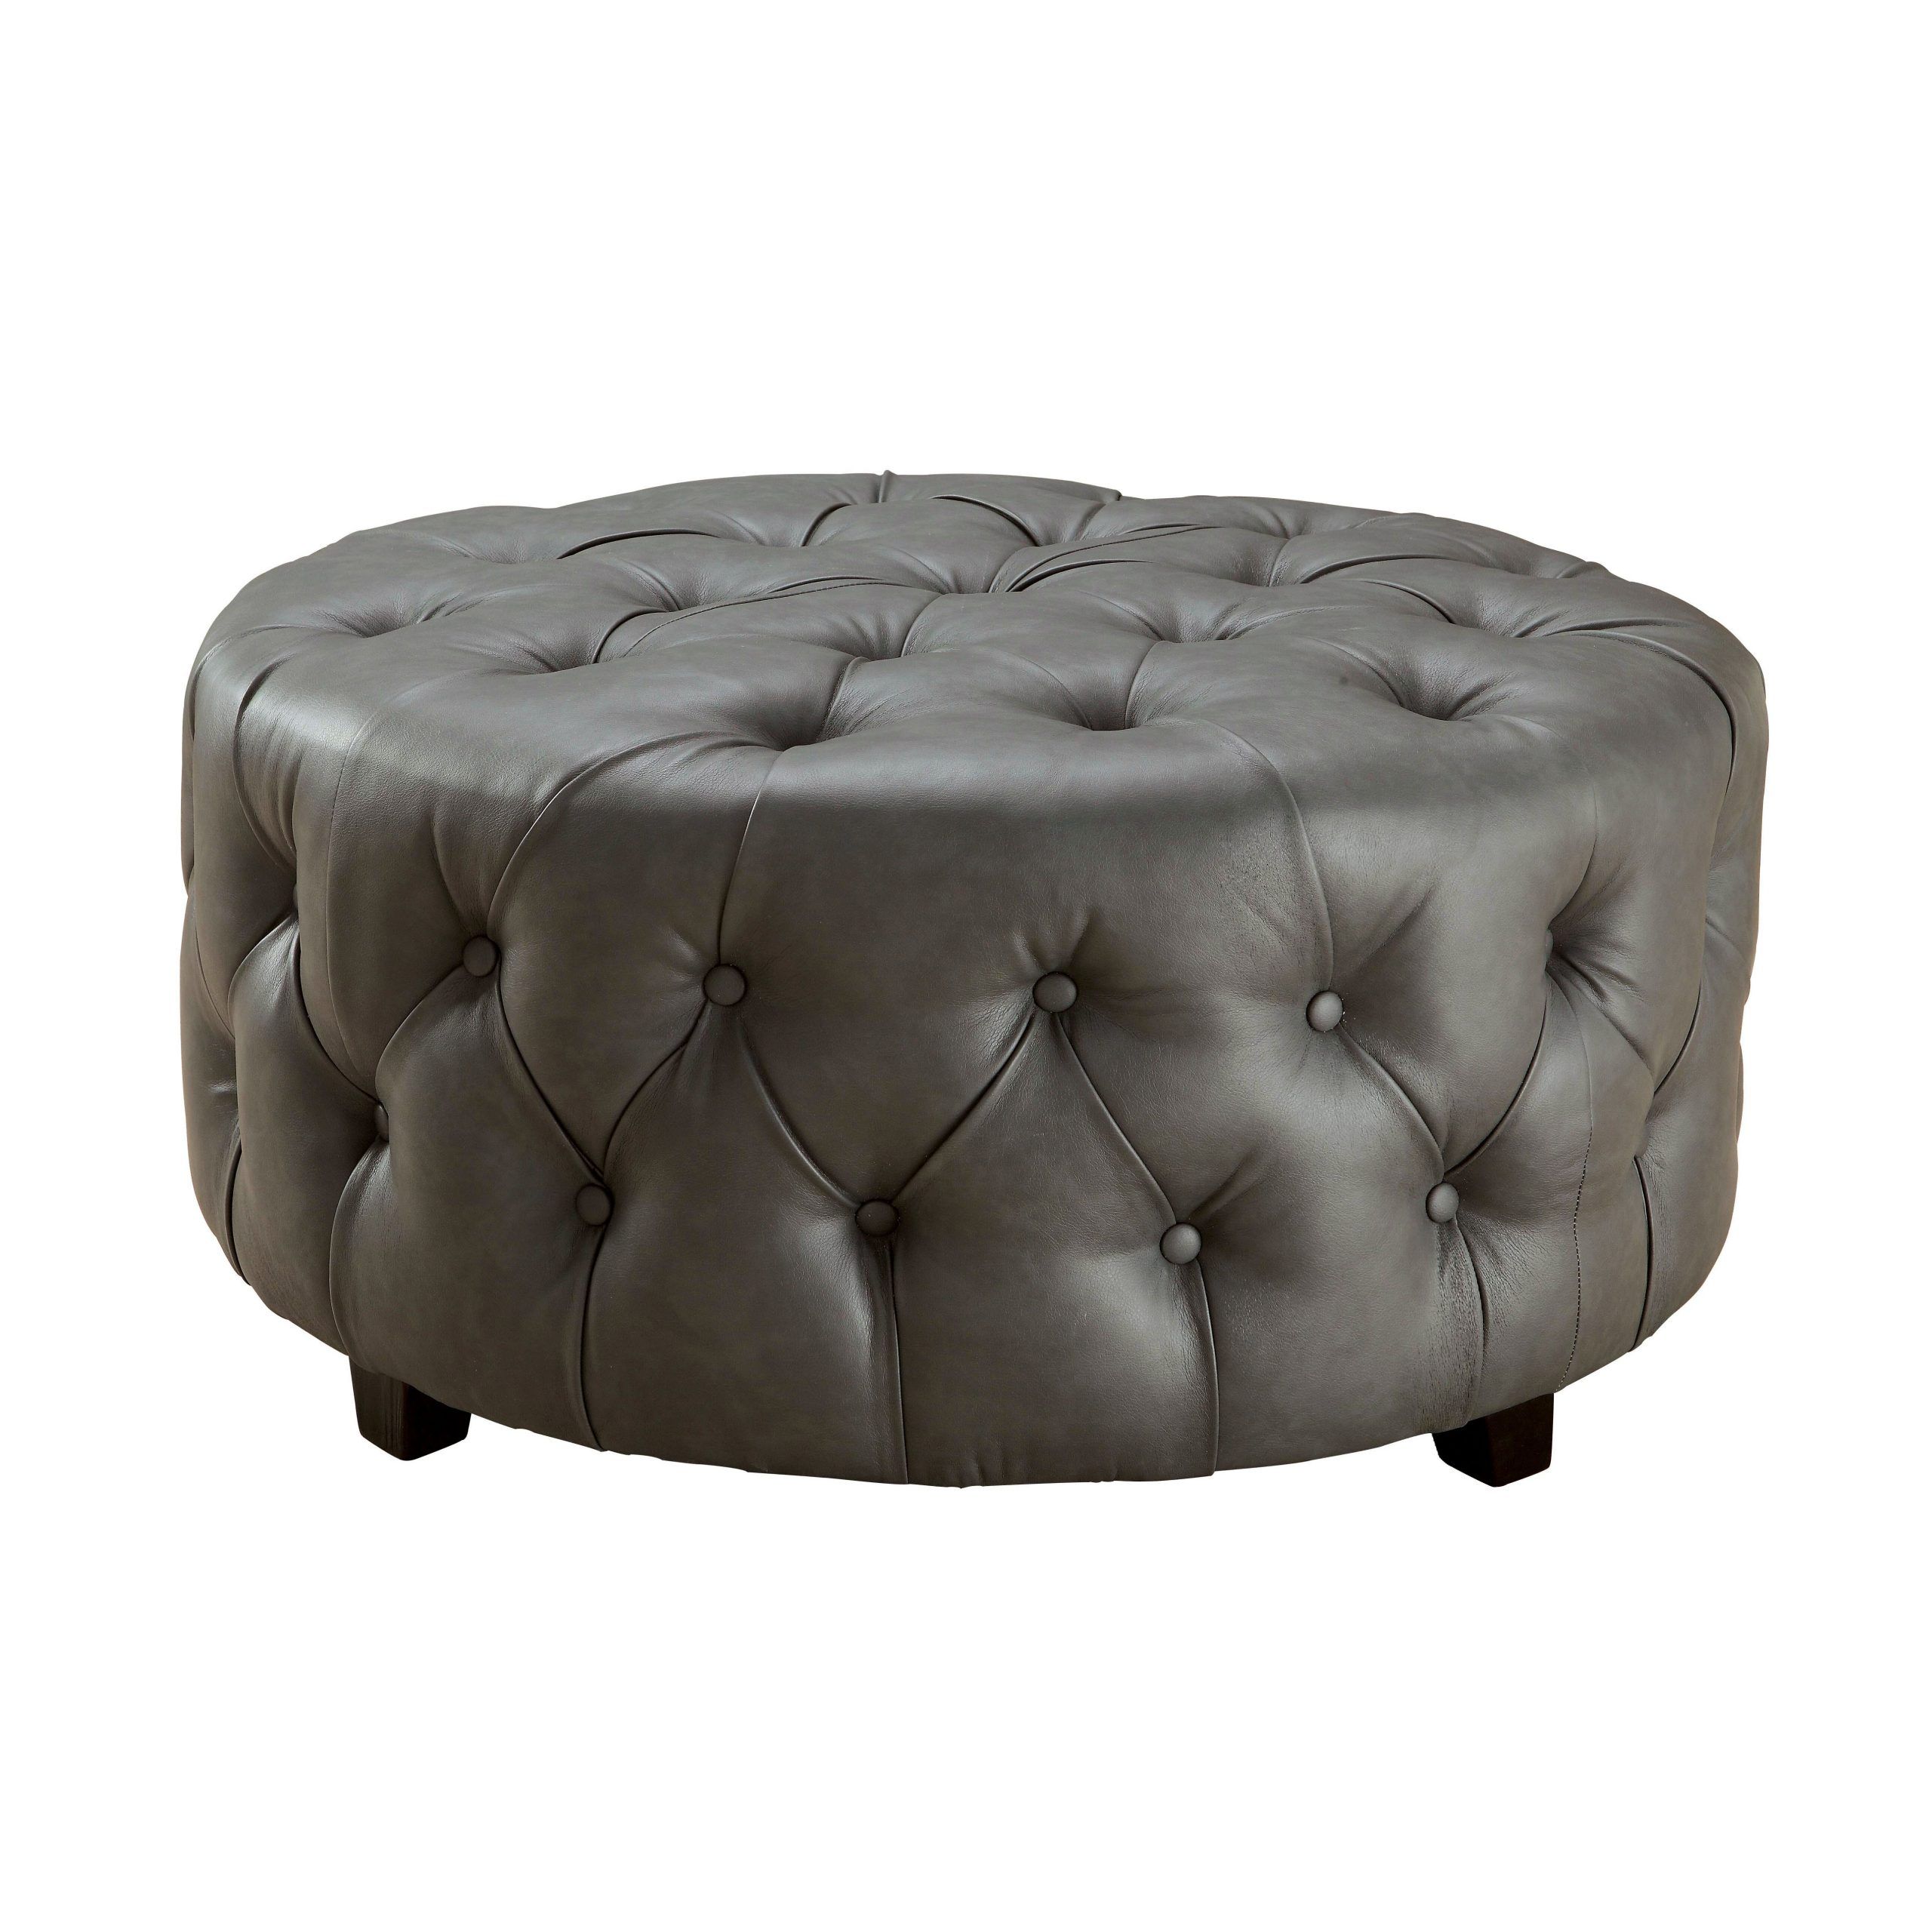 Medium Gray Leather Pouf Ottomans Within Popular House Of Hampton Bowie Leather Tufted Round Ottoman & Reviews (View 1 of 10)